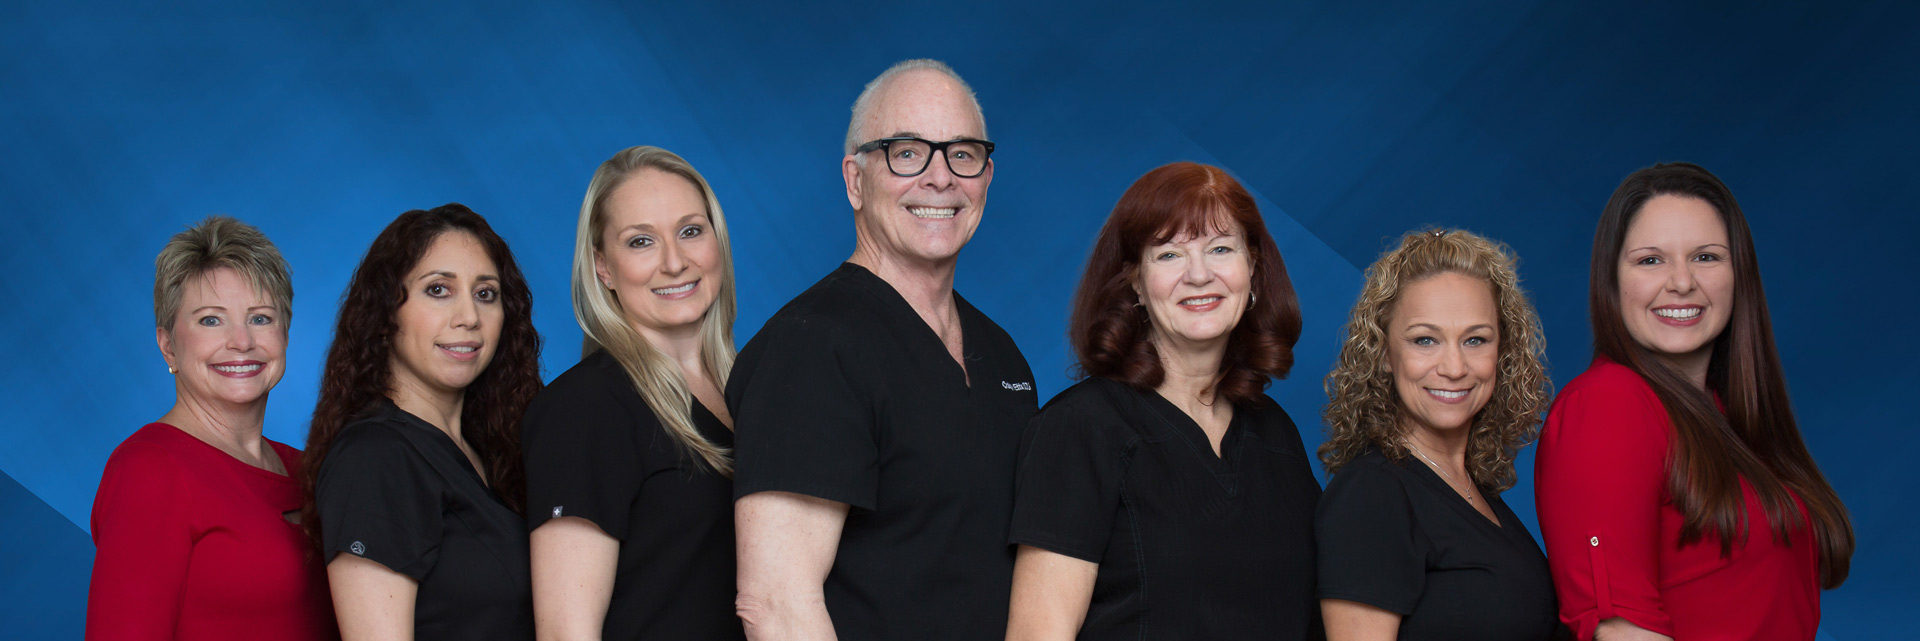 The team at Craig H. Etts, DDS Family and Cosmetic Dentistry smiling with a tropical garden backdrop